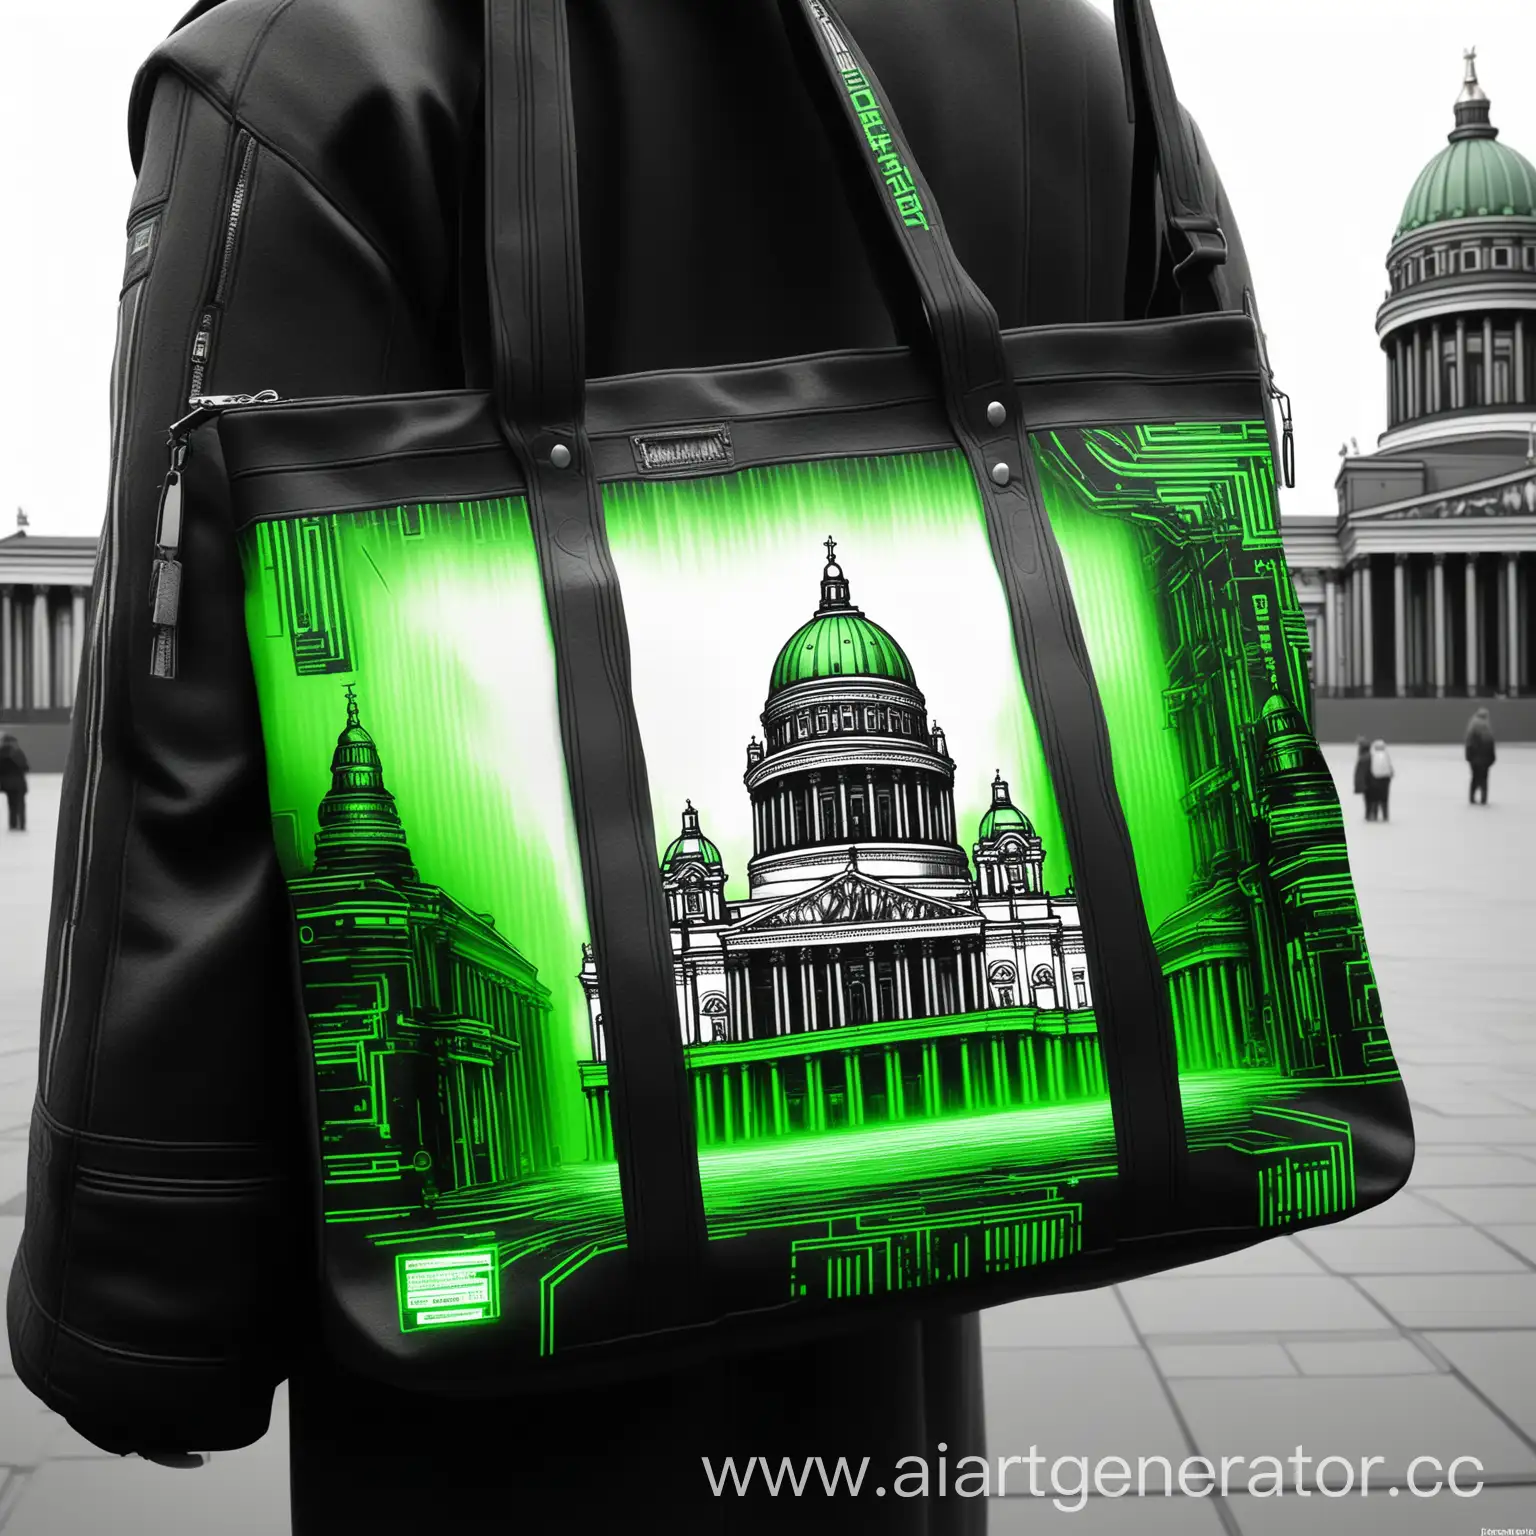 Saint-Isaacs-Cathedral-Cyberpunk-Art-Print-in-Black-and-White-with-Green-Accents